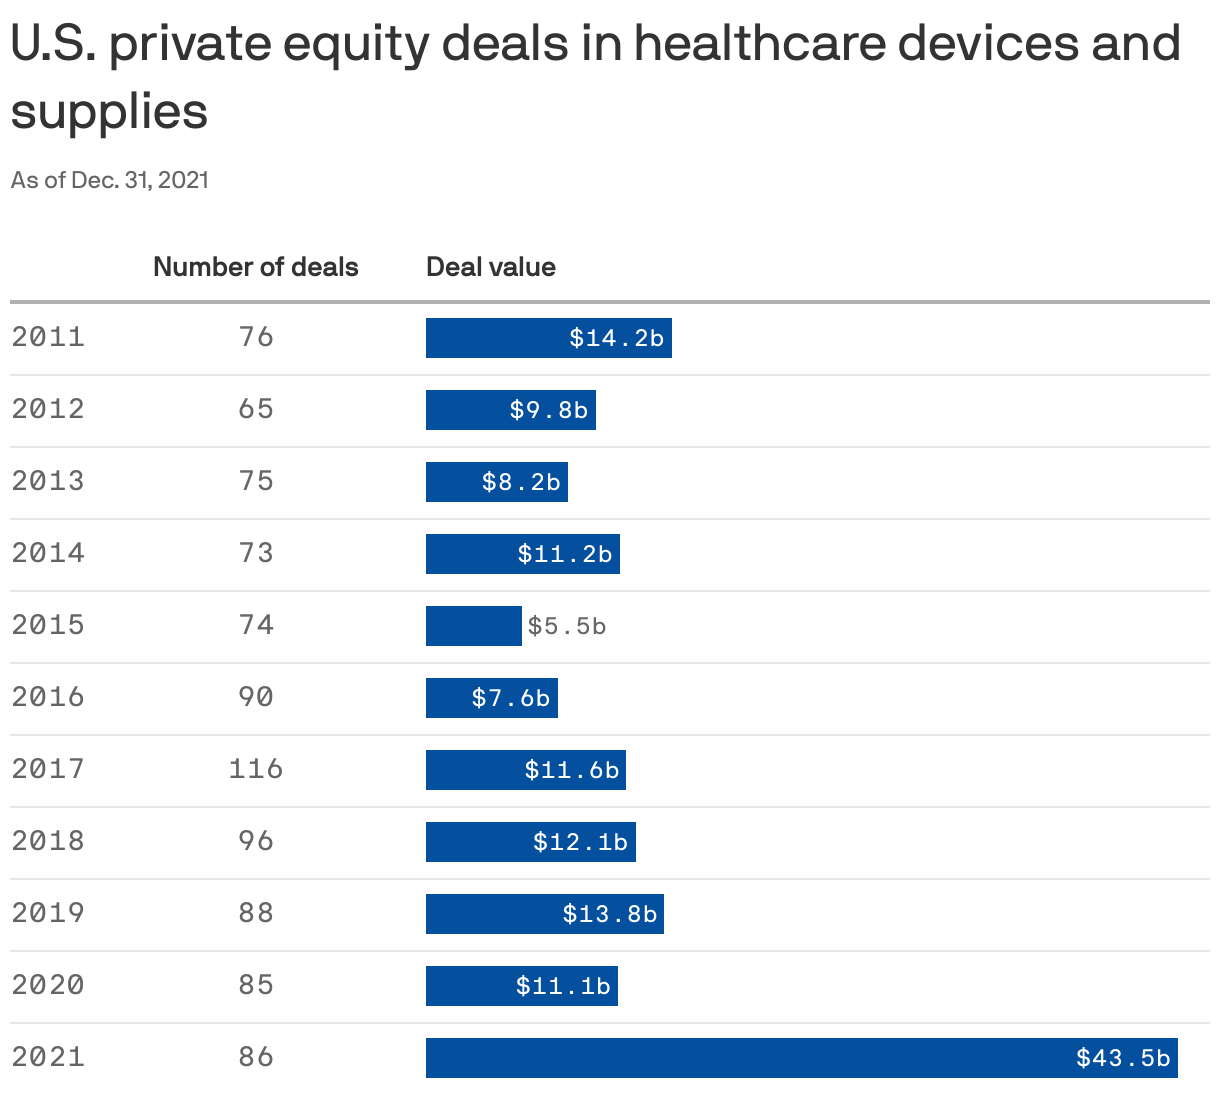 U.S. private equity deals in healthcare devices and supplies